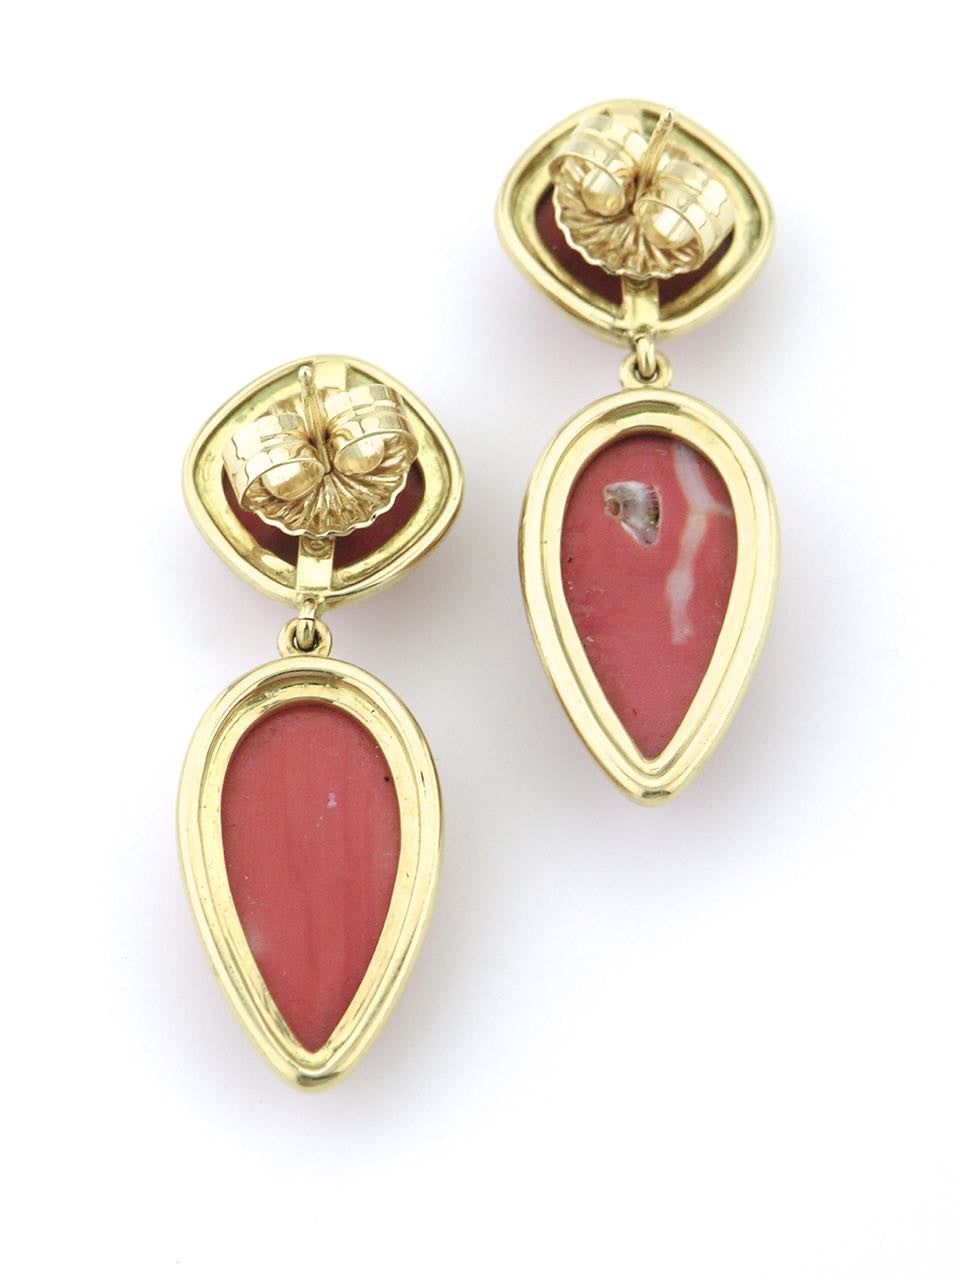 Tony White gold and coral drop earrings